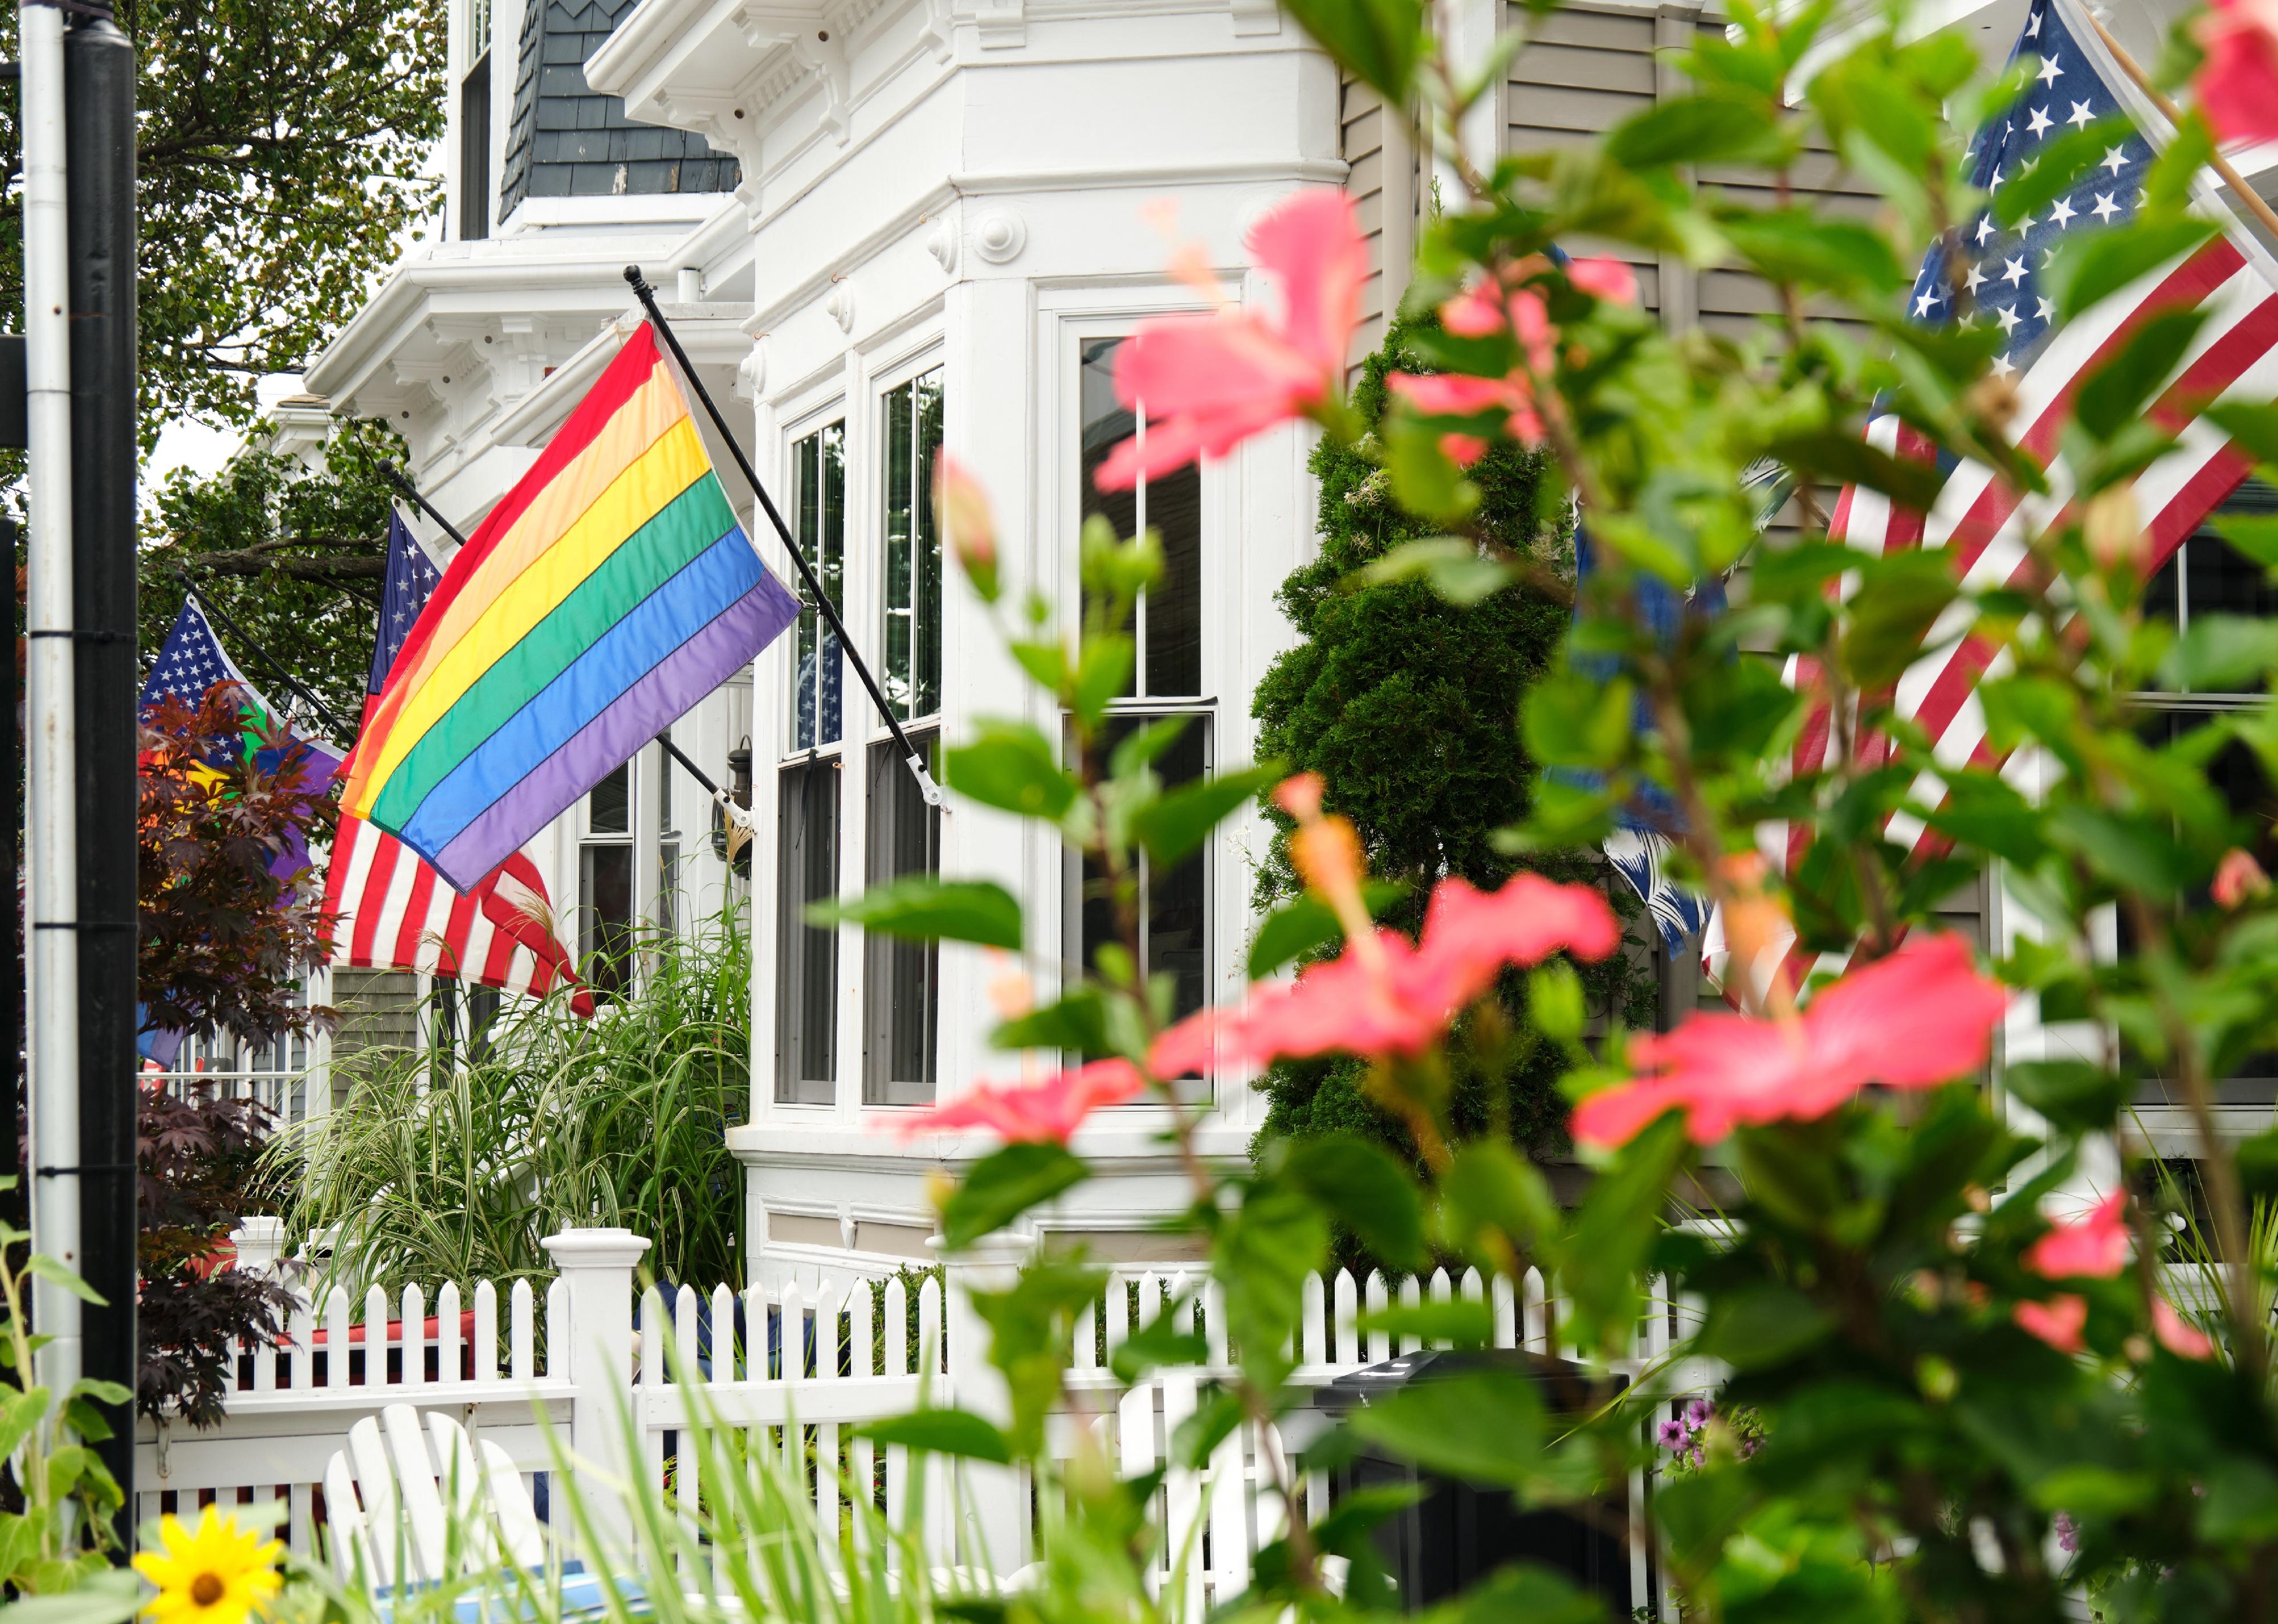 A rainbow pride flag is flanked by American flags on a house